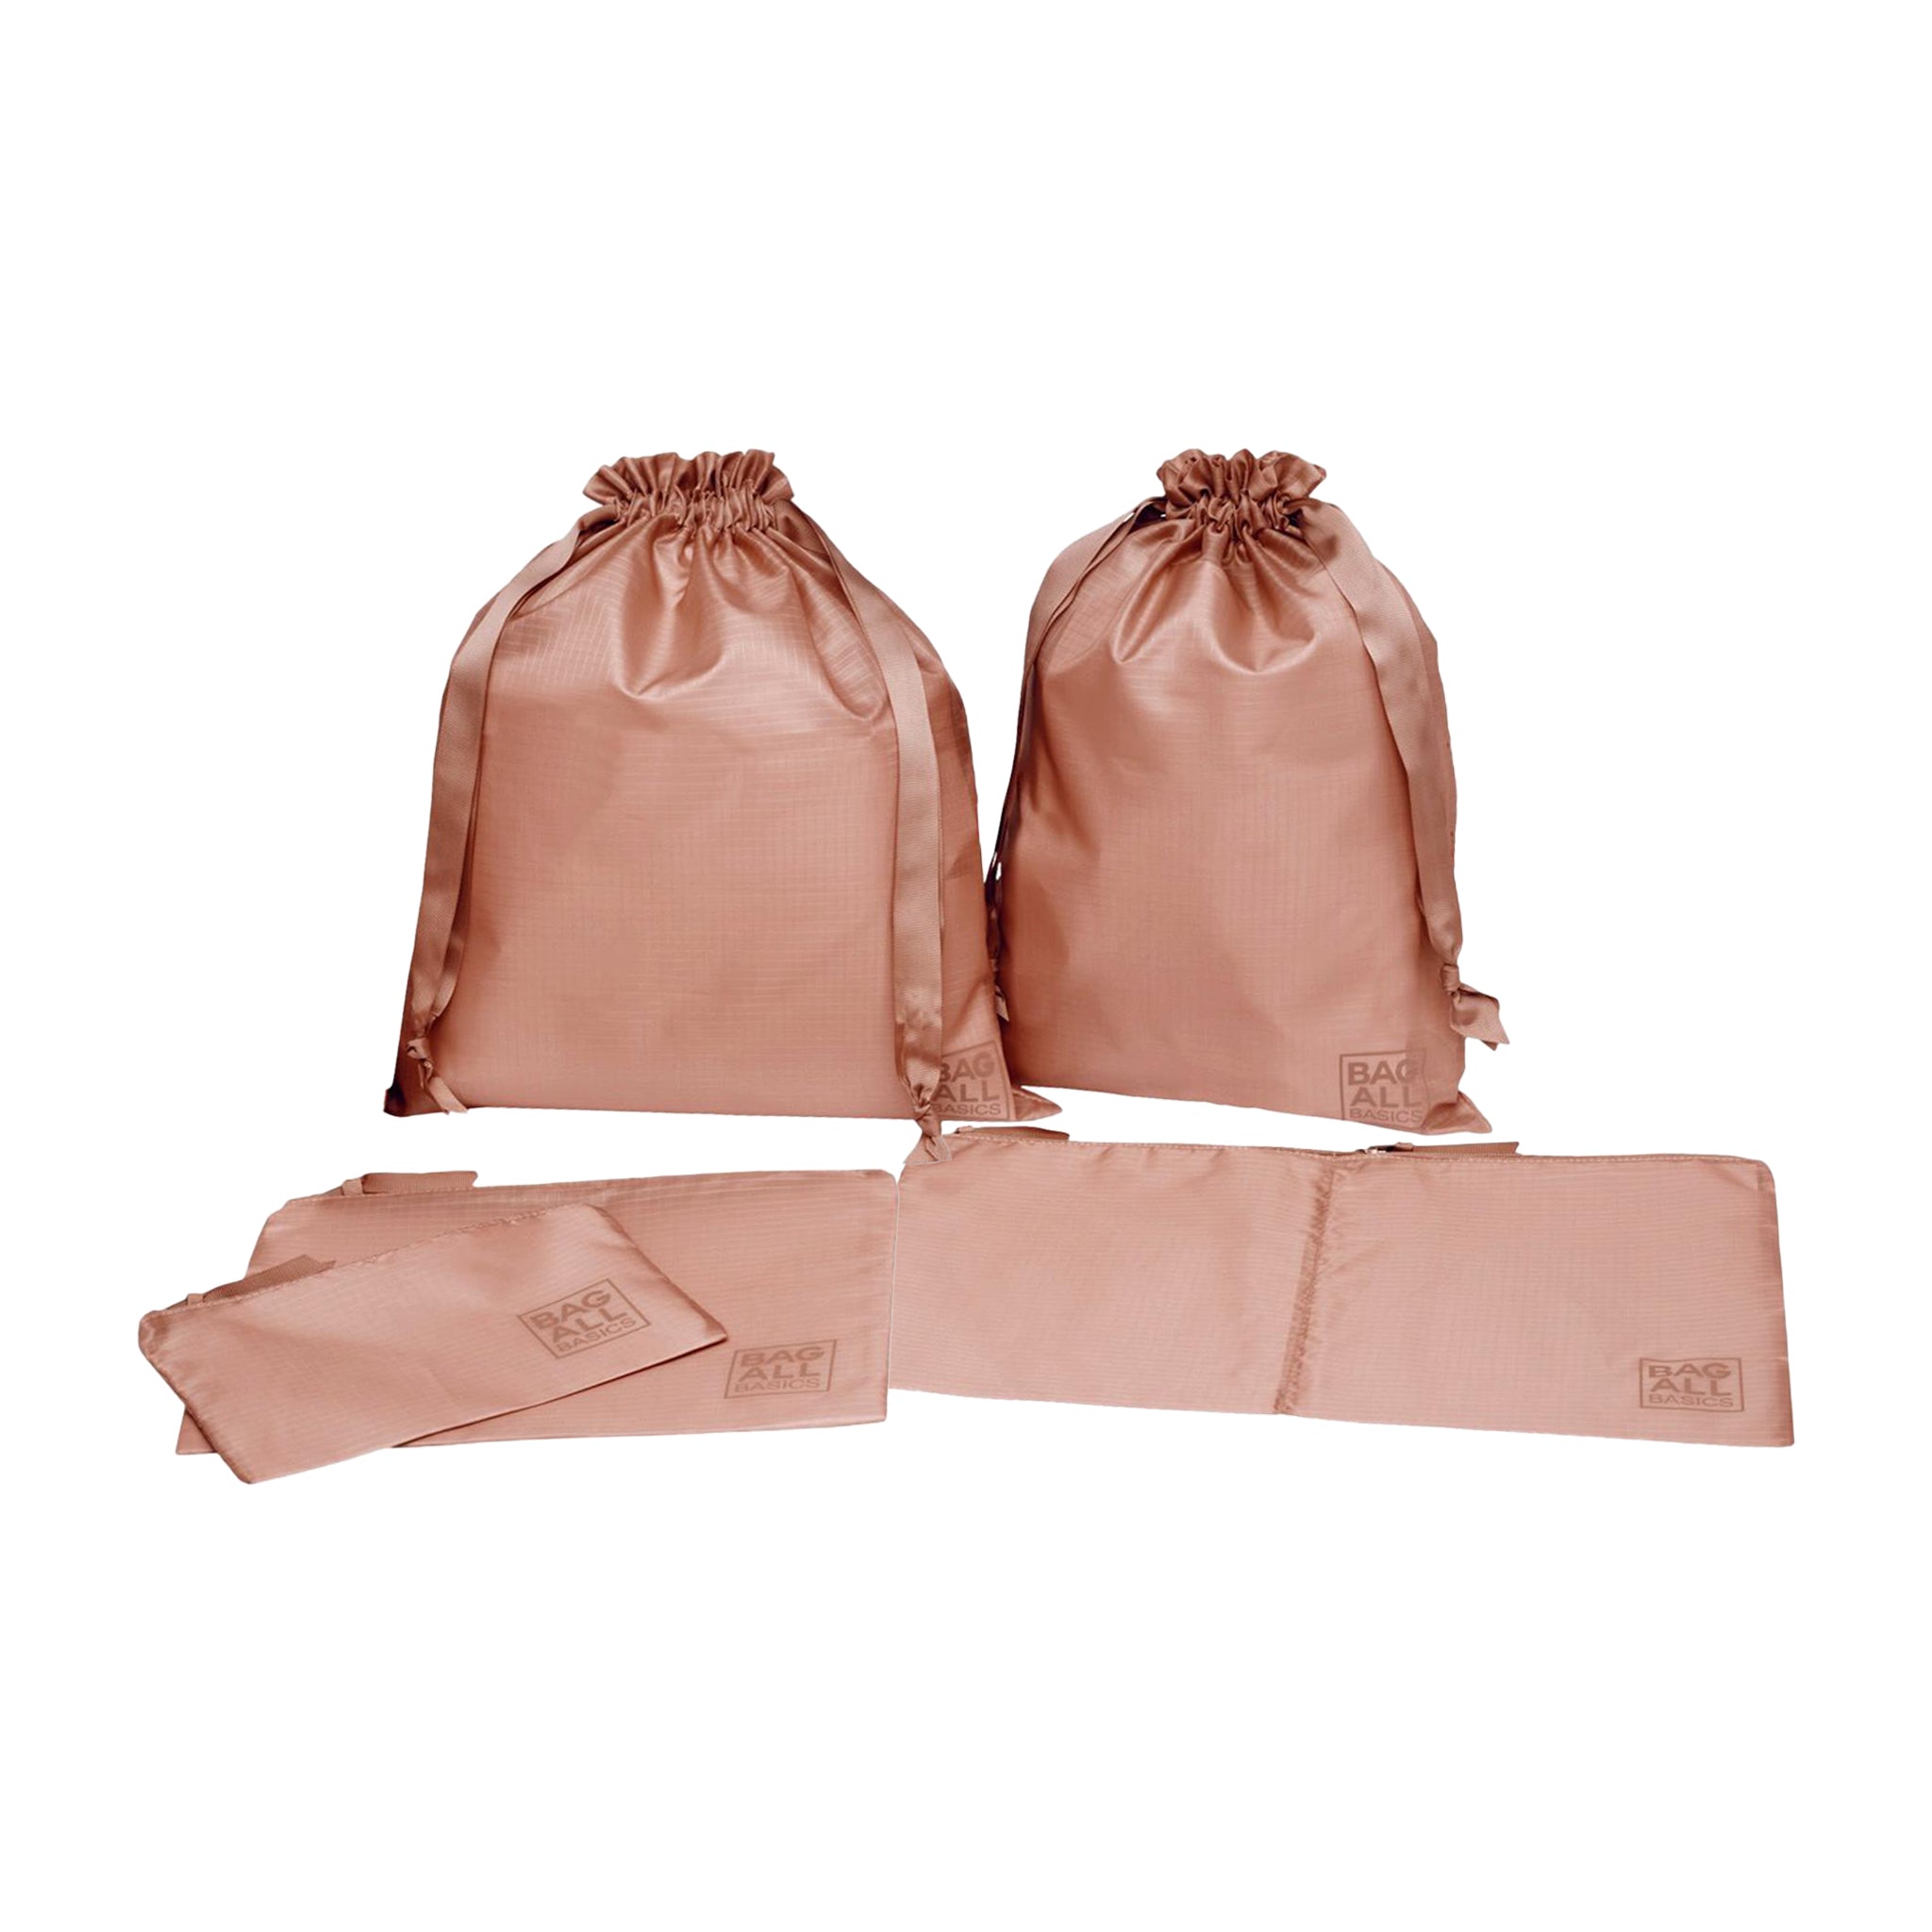 Packing Bags Set in Recycled Nylon, 5-pack, Pink/Blush